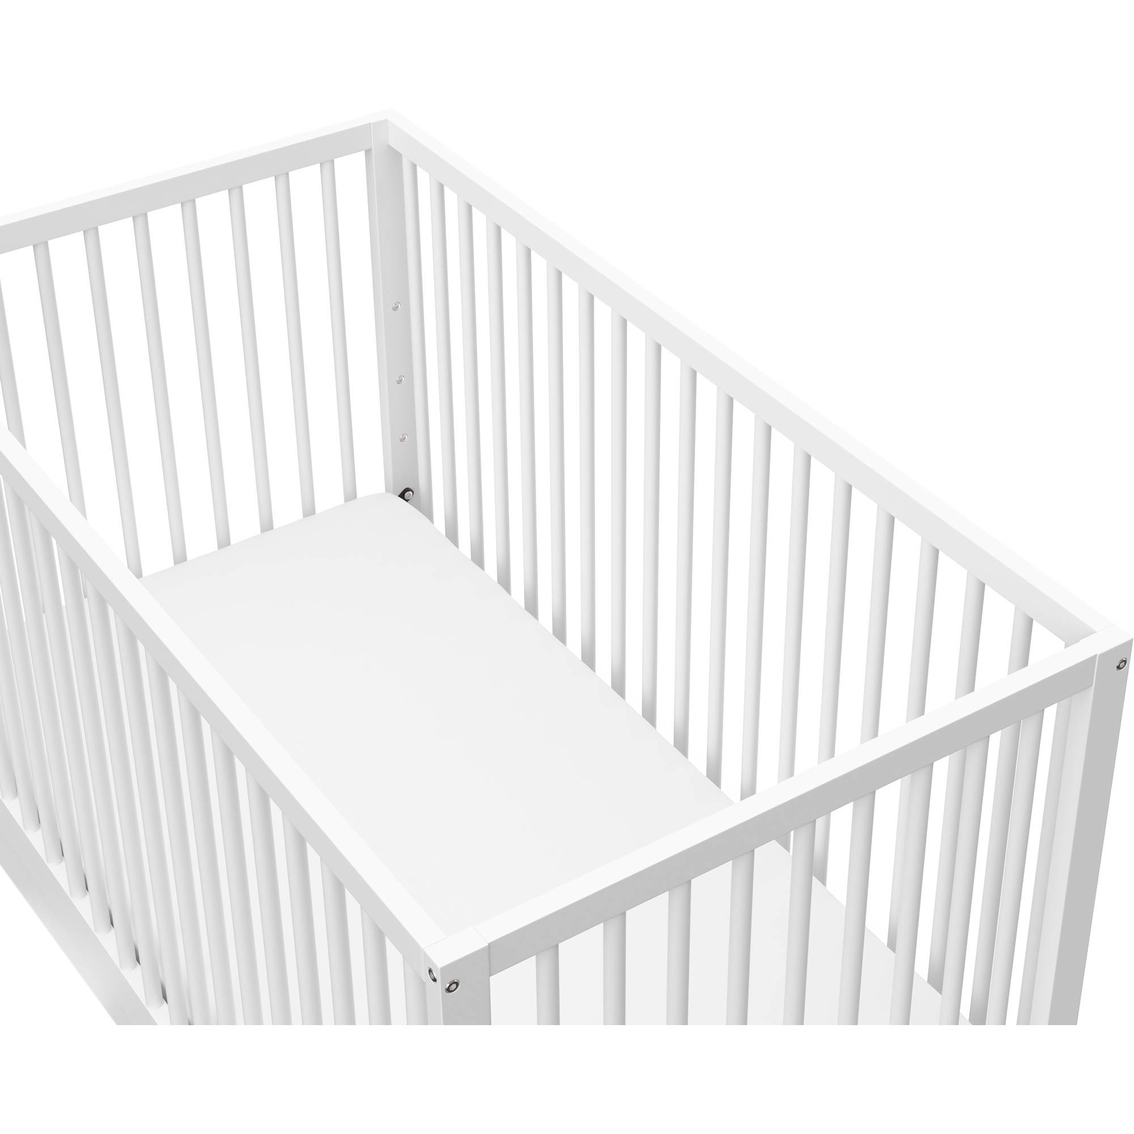 Graco Teddi 5 in 1 Convertible Crib with Drawer - Image 7 of 7